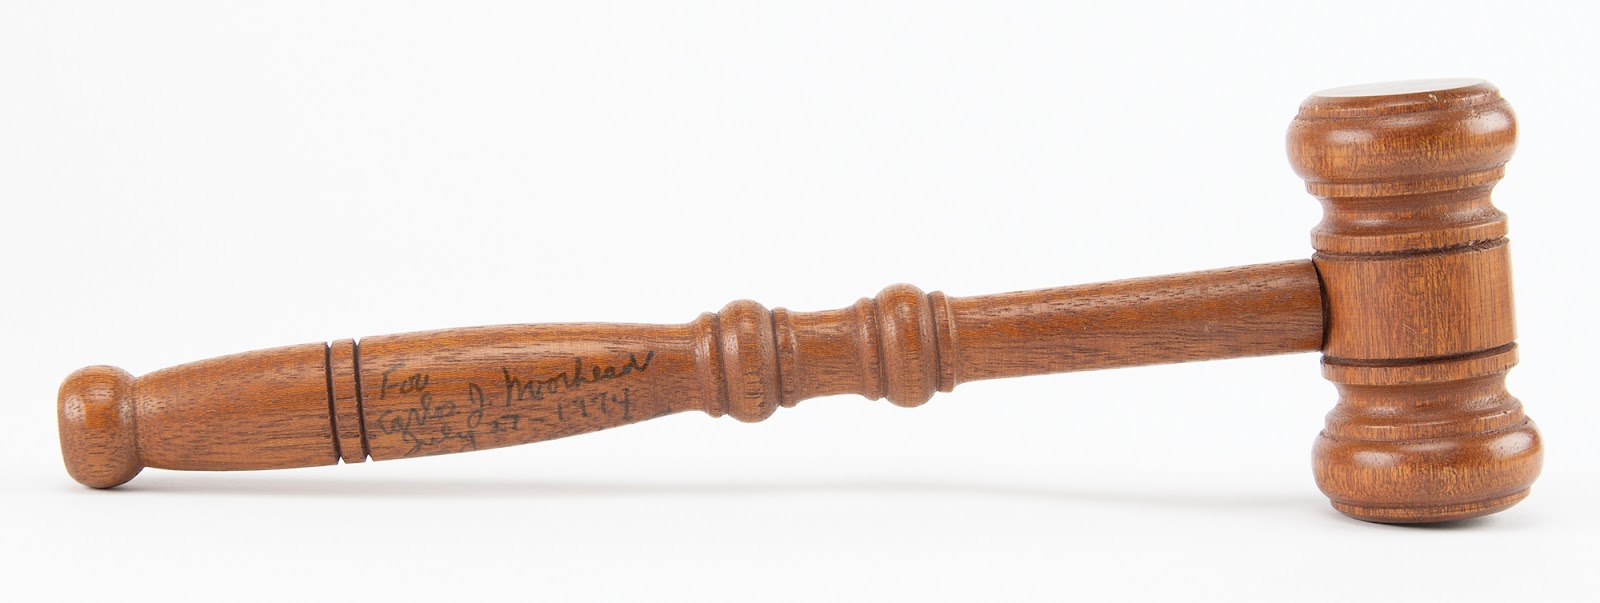 Pete Rodino’s gavel used during the impeachment hearings of President Nixon, featuring his inscription to Carlos Moorhead on its handle.